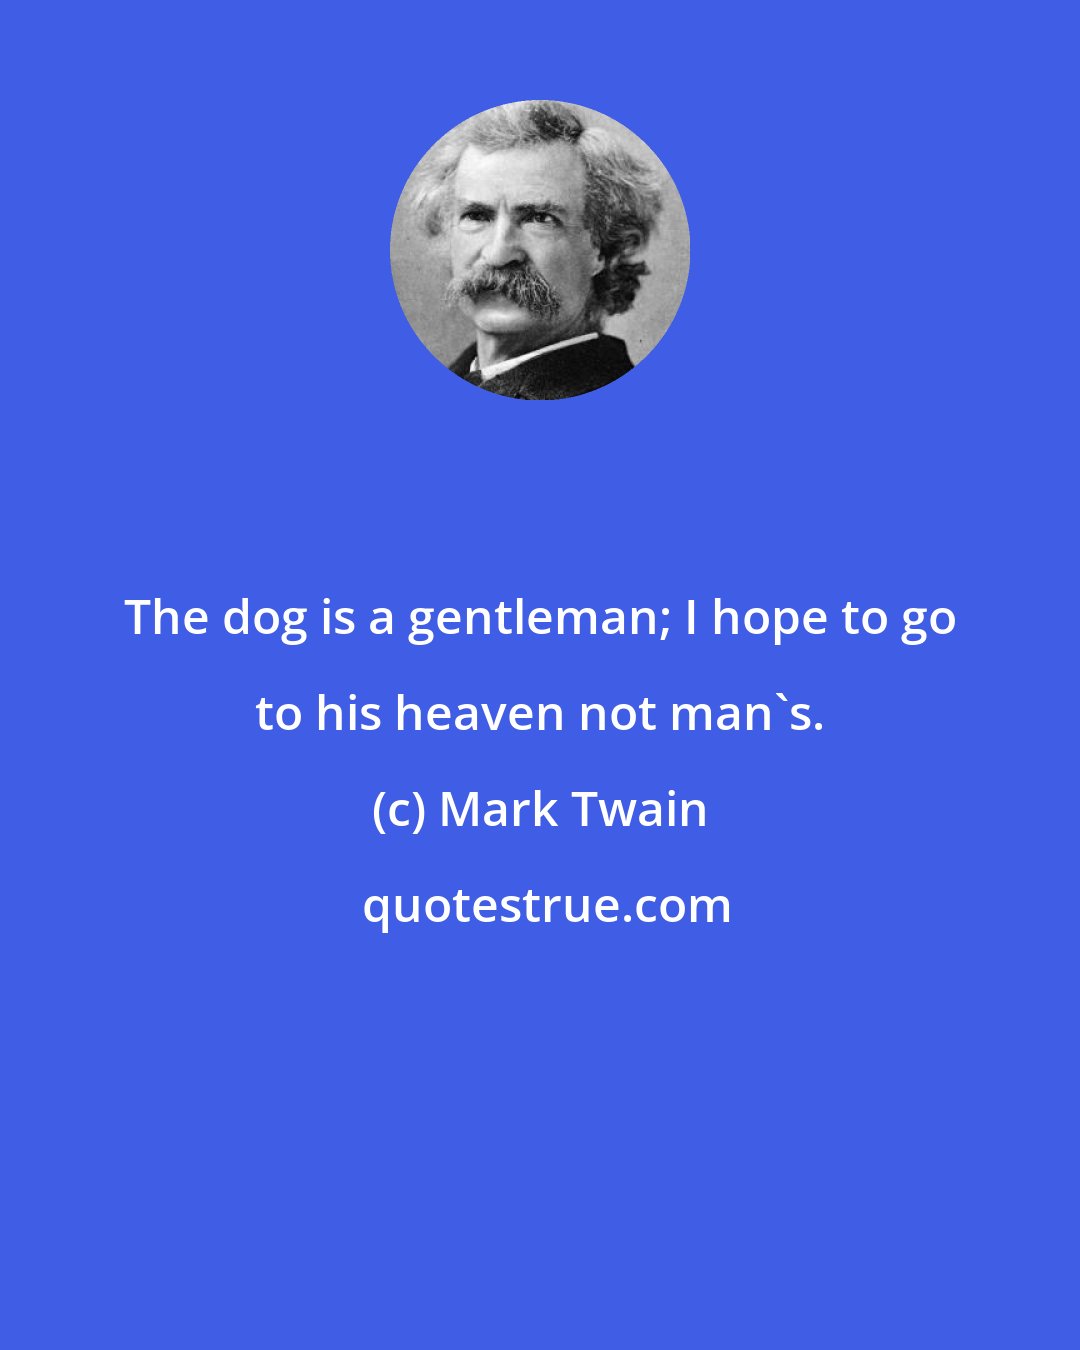 Mark Twain: The dog is a gentleman; I hope to go to his heaven not man's.